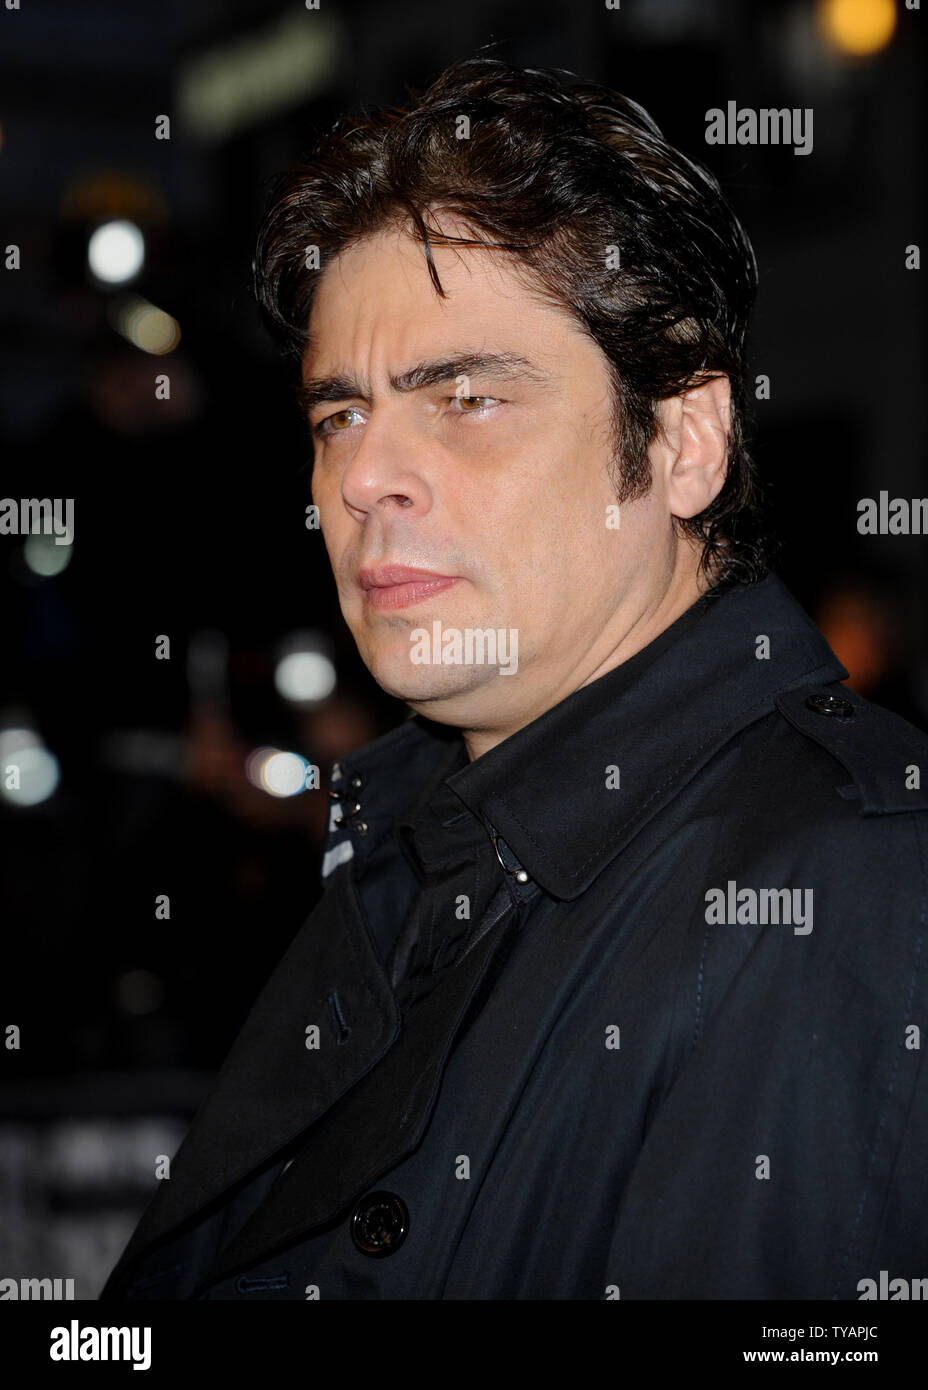 American actor Benicio Del Toro attends the premiere of 'Che' at The Times BFI London Film Festival at Odeon West End, Leicester Square in London on October 25, 2008.  (UPI Photo/Rune Hellestad) Stock Photo